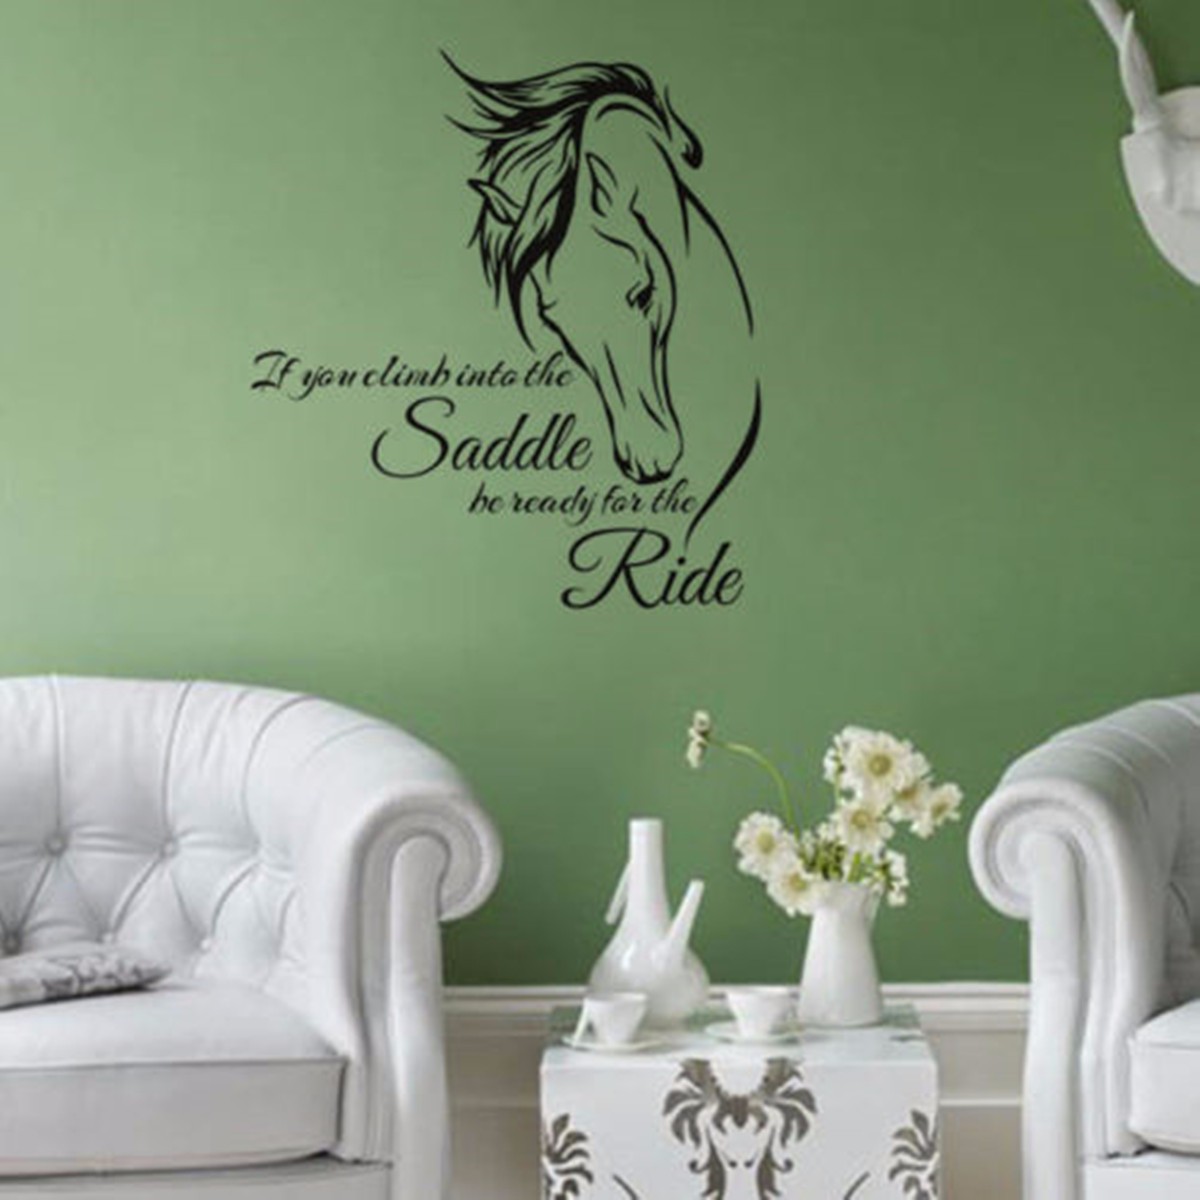 Horse-Stickers-Wall-Decal-Saddle-Ride-Living-Room-Wall-Home-Decorations-1577588